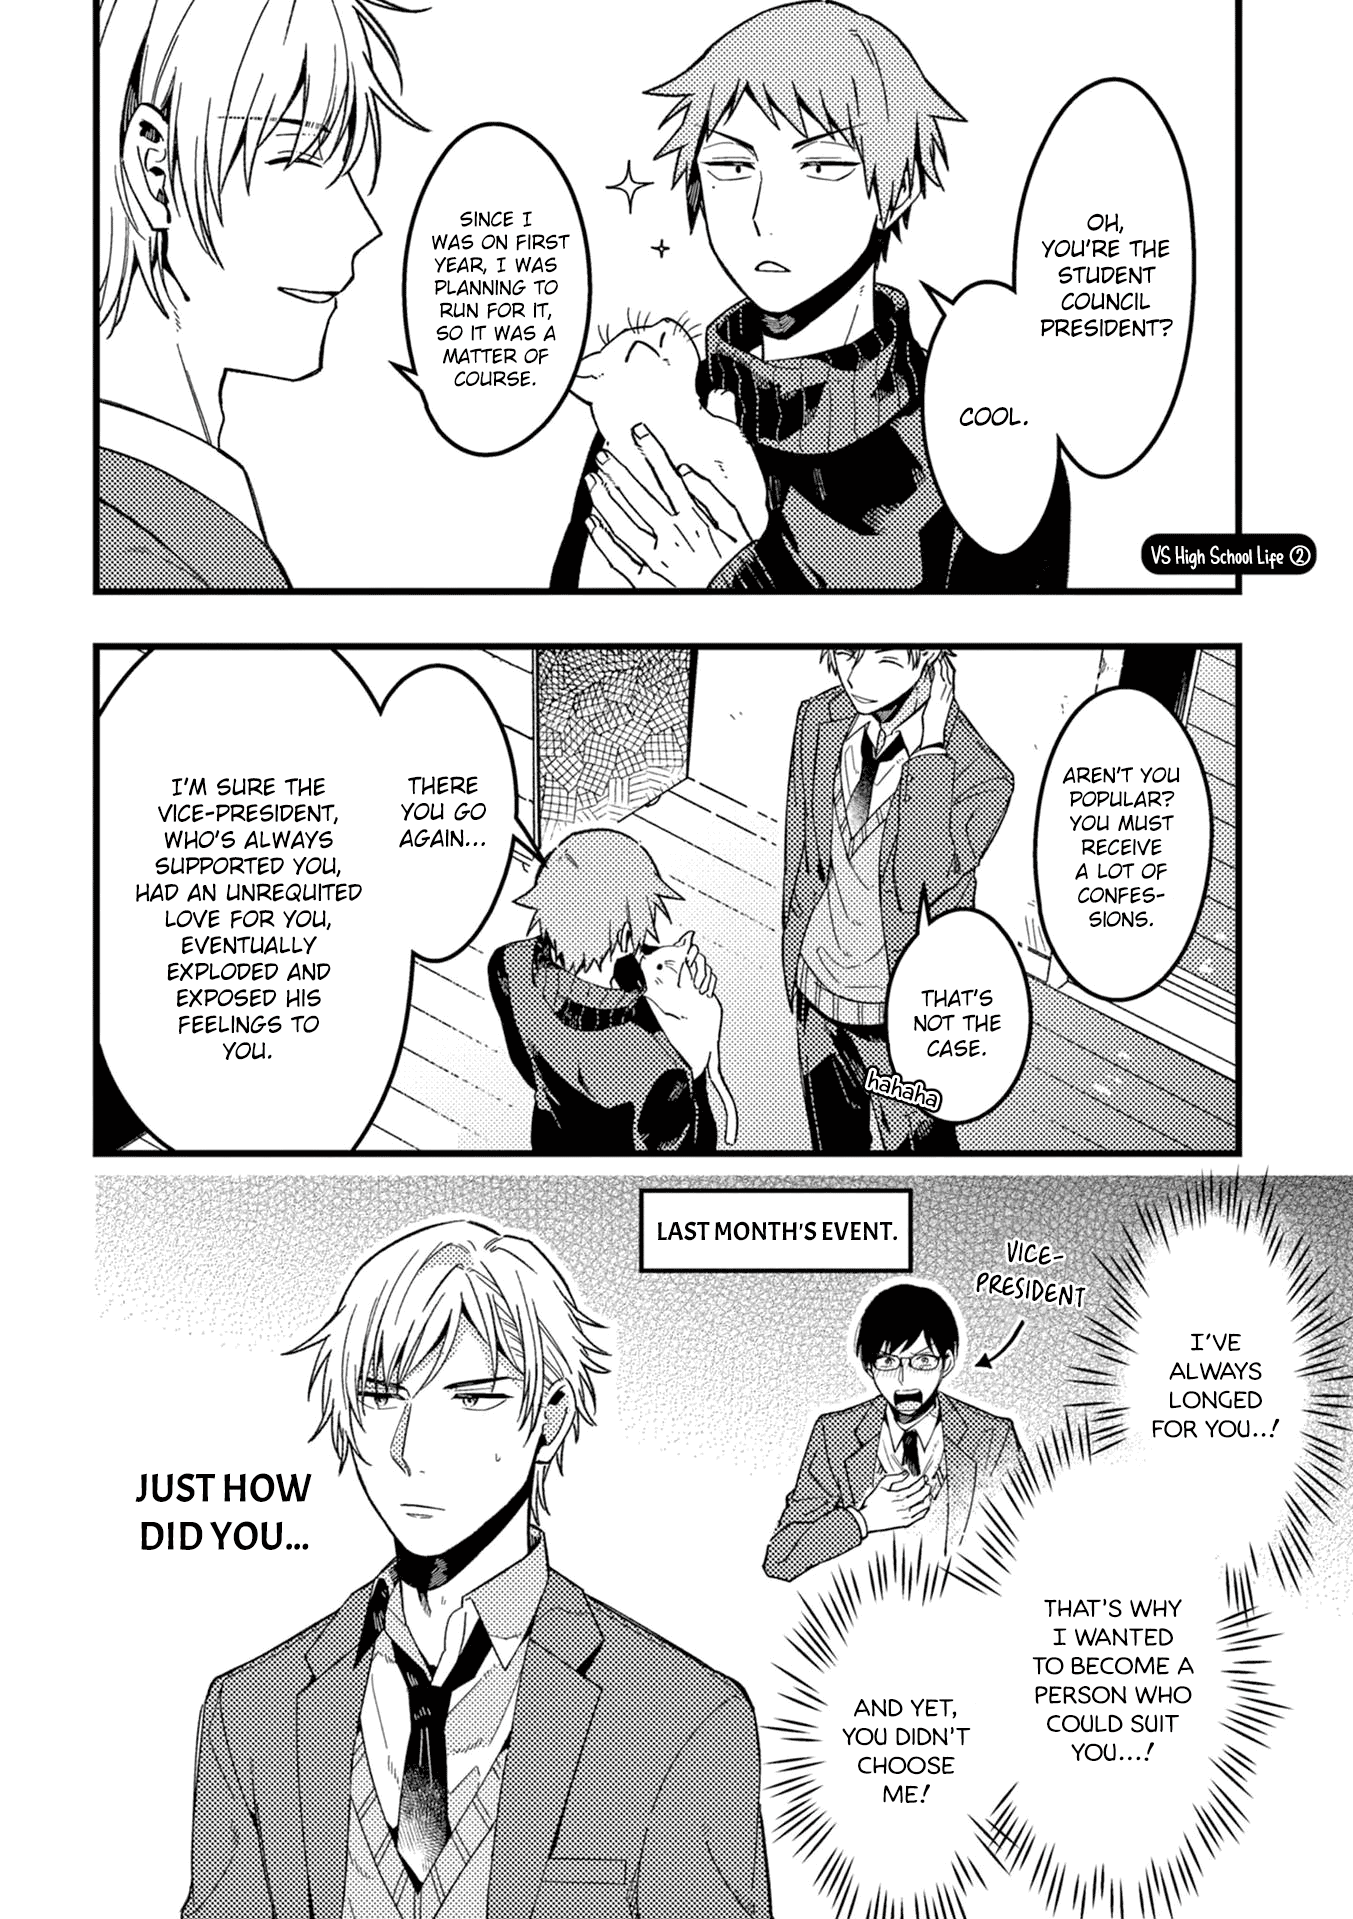 A World Where Everything Definitely Becomes Bl Vs. The Man Who Definitely Doesn't Want To Be In A Bl Vol.2 Chapter 35: Vs High School Life - Picture 3